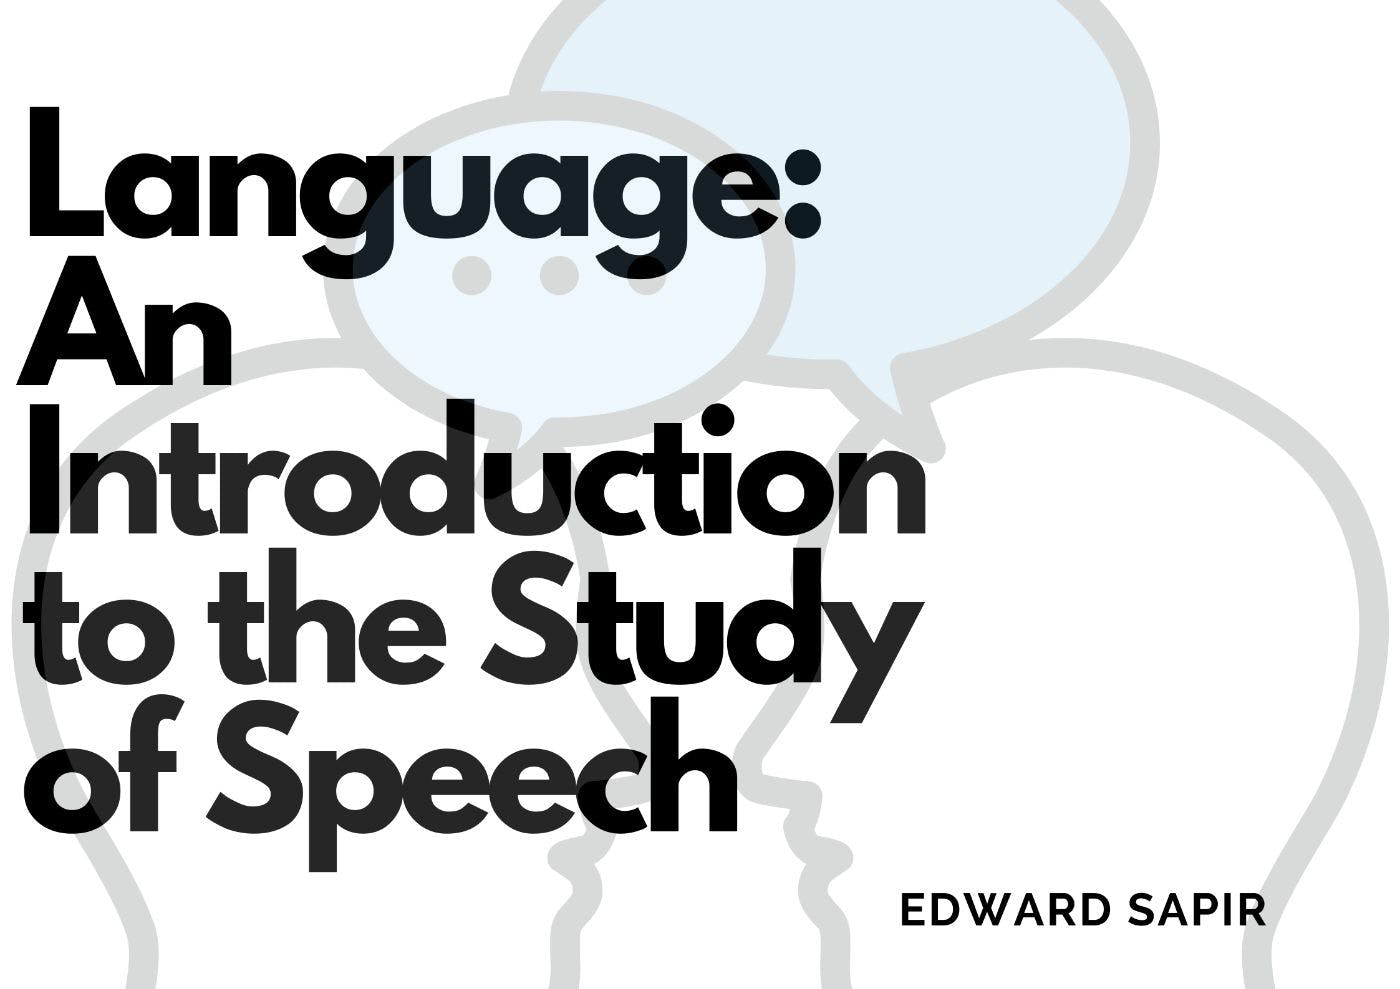 featured image - Language: An Introduction to the Study of Speech by Edward Sapir  - Table of Links